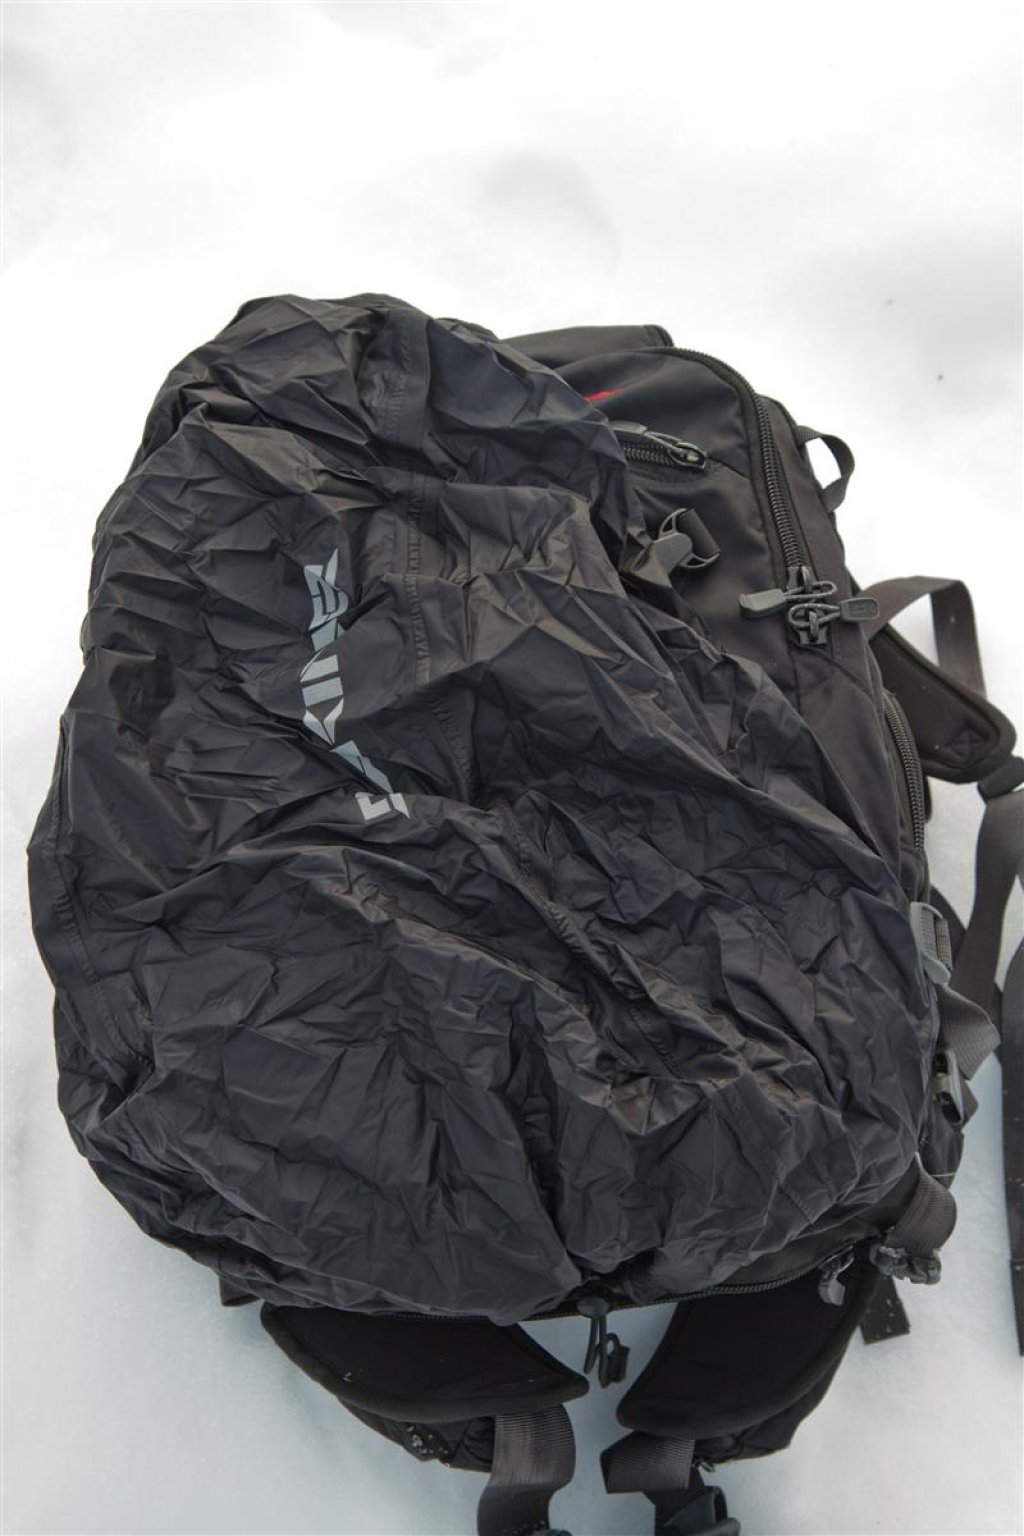 The integrated rain cover is stowed in a compartment at the bottom of the backpack and is detachable